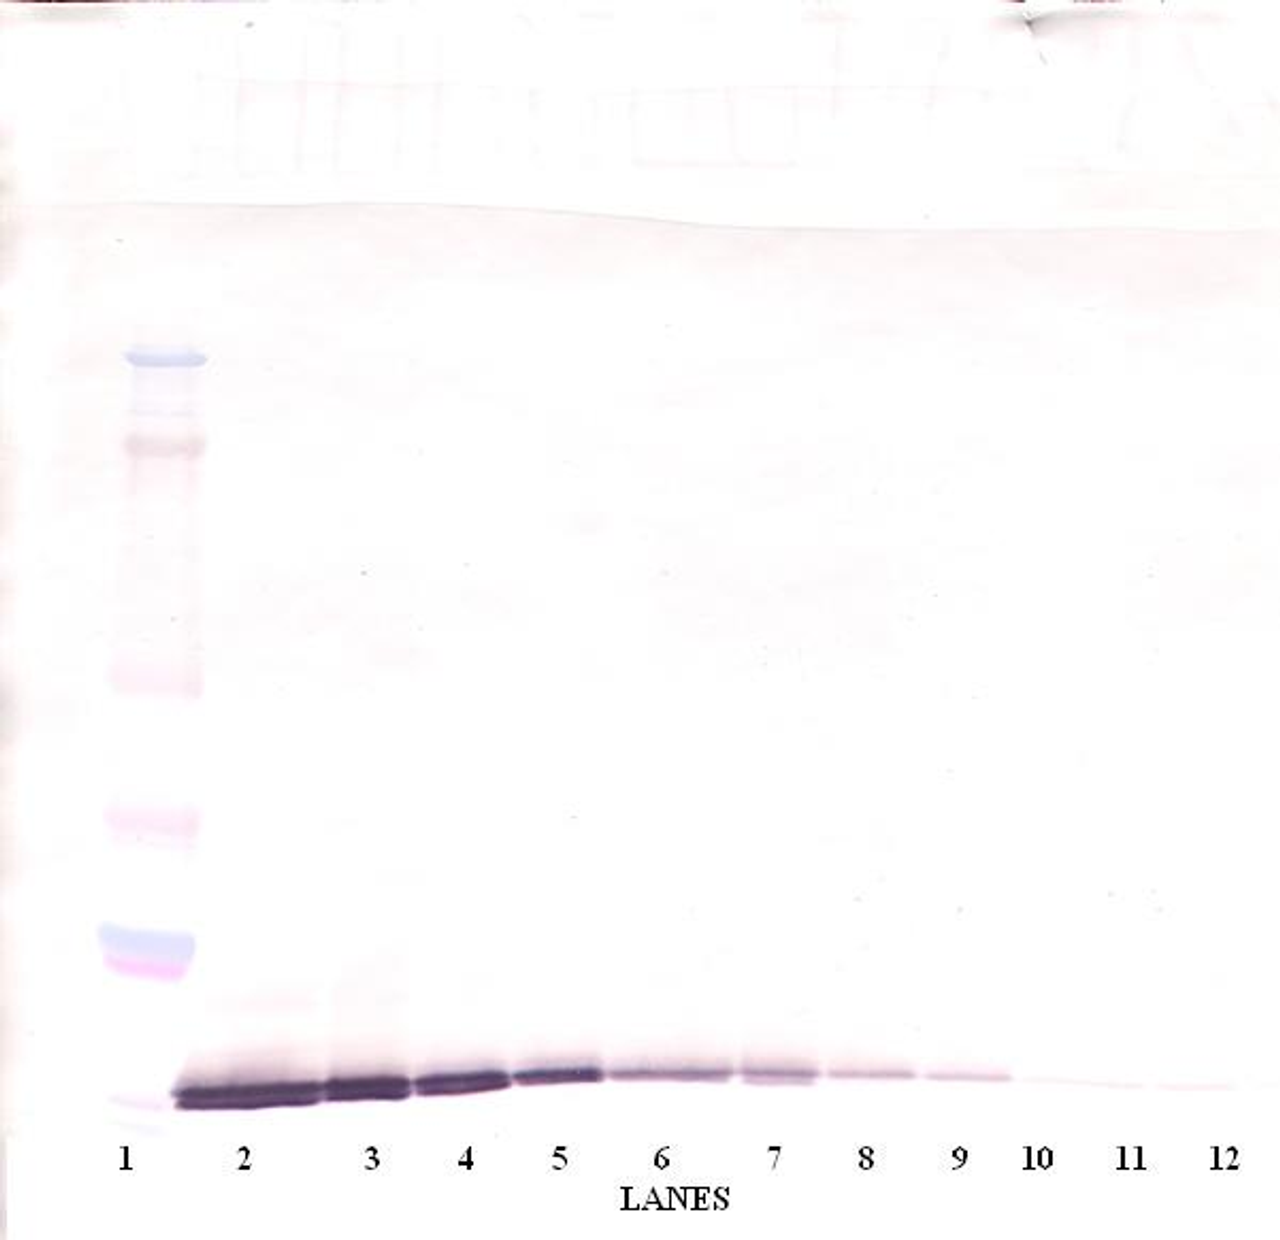 To detect Human MIP-3-beta by Western Blot analysis this antibody can be used at a concentration of 0.1-0.2 ug/ml. Used in conjunction with compatible secondary reagents the detection limit for recombinant Human MIP-3-beta is 1.5 - 3.0 ng/lane, under either reducing or non-reducing conditions.